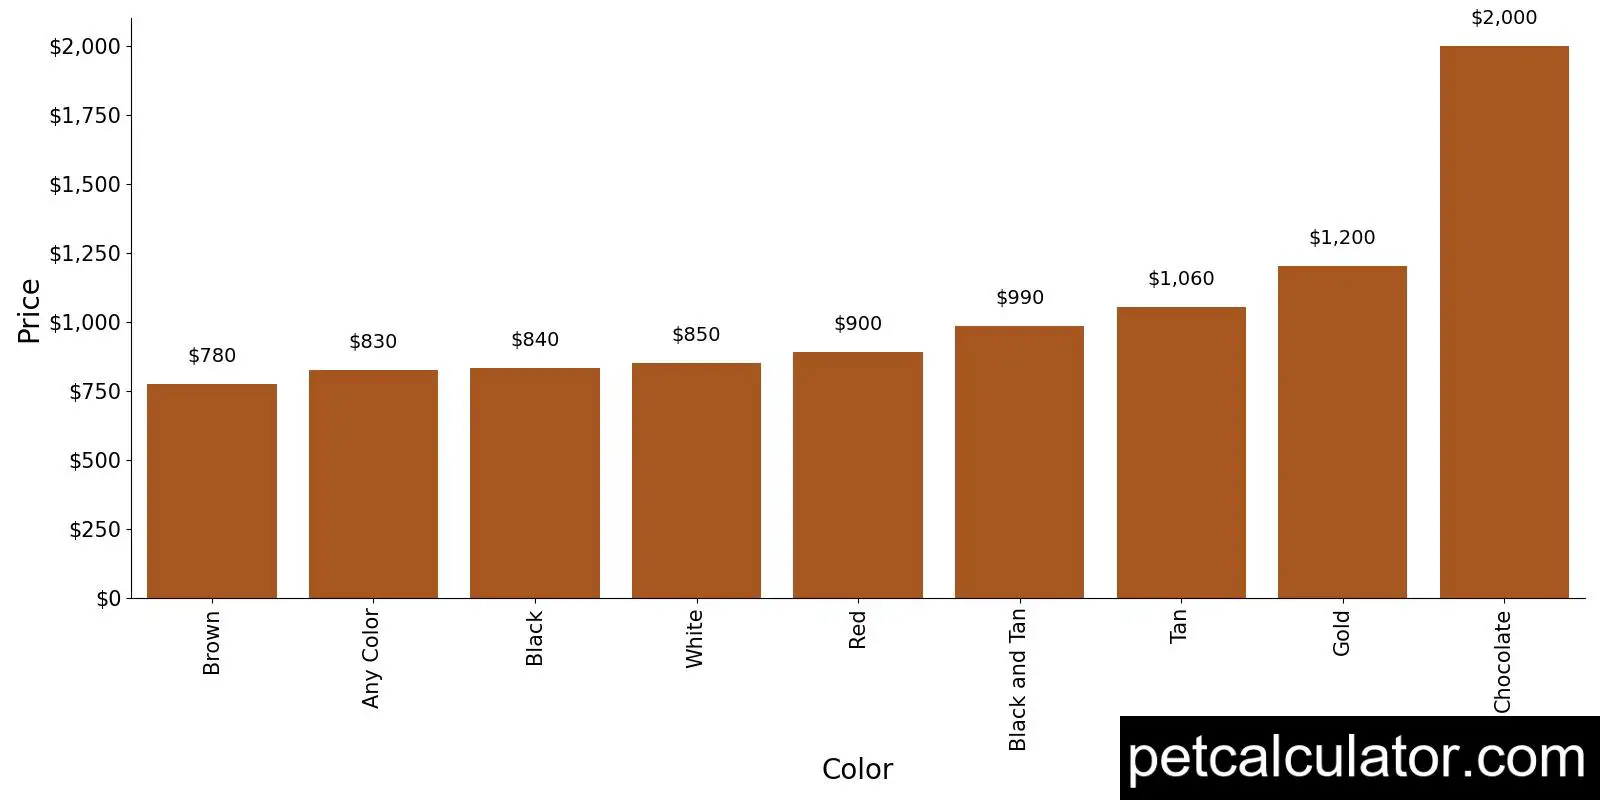 Price of Bloodhound by Color 